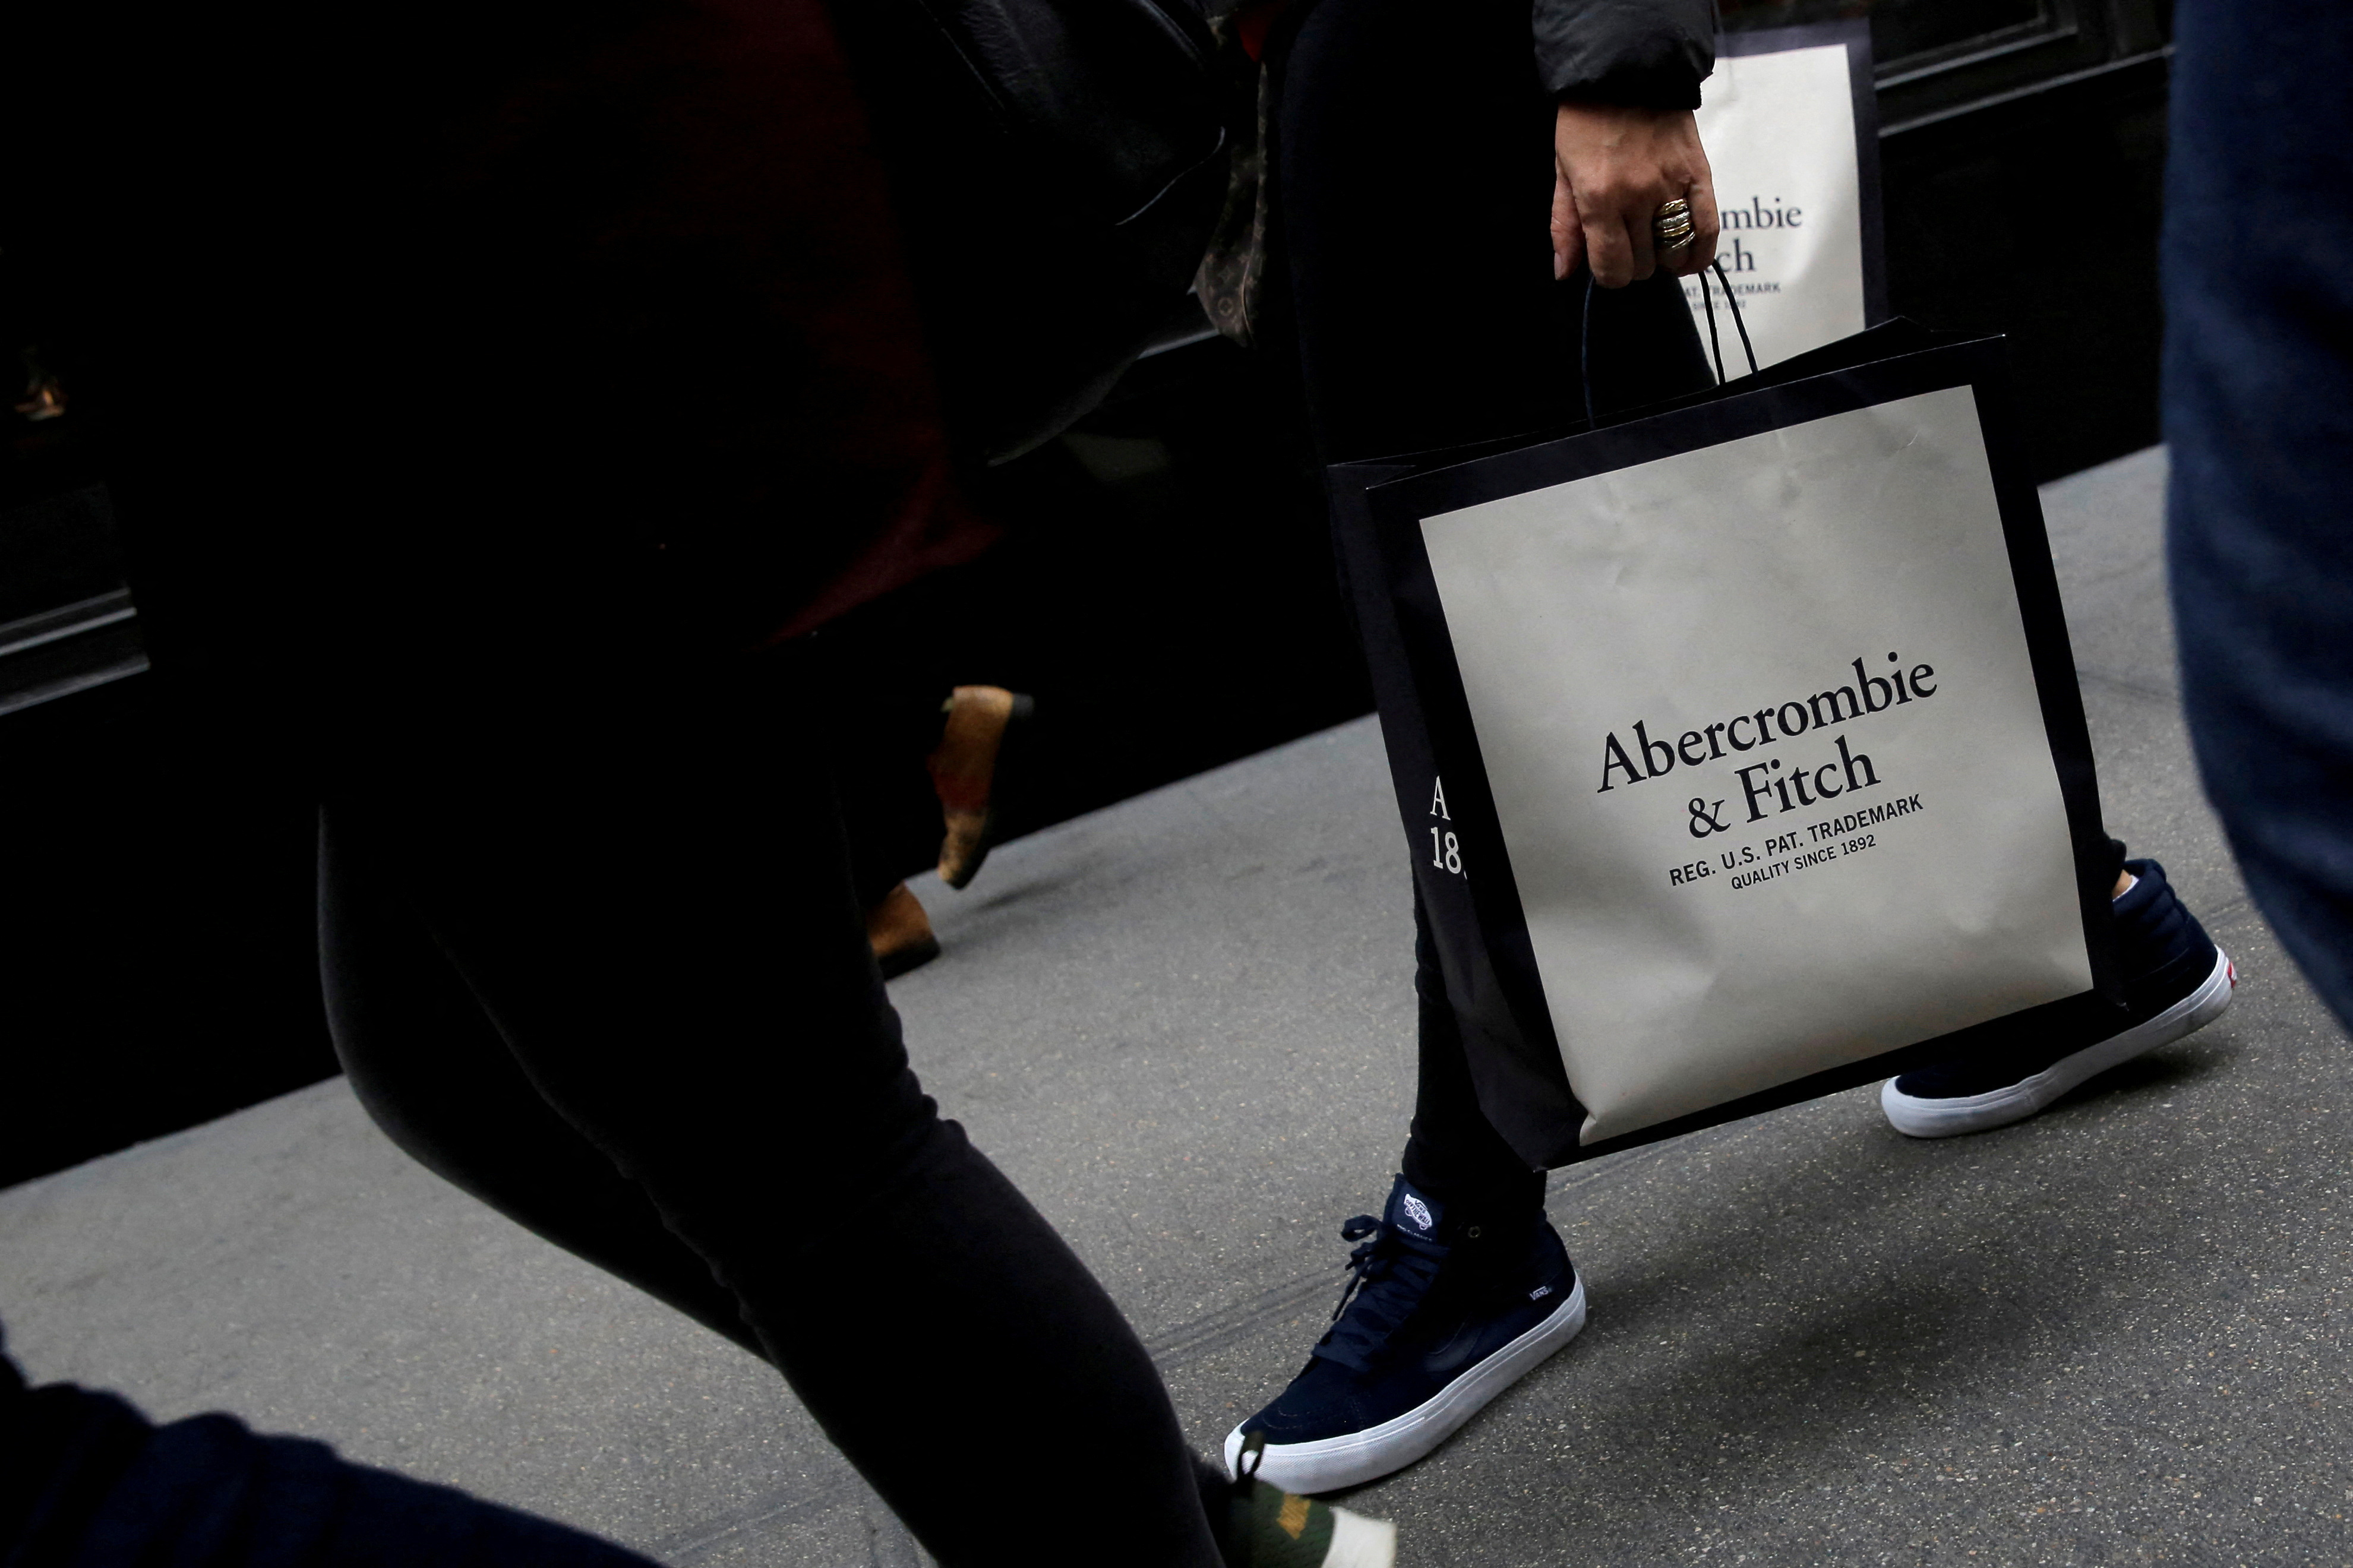 A person carries a bag from the Abercrombie & Fitch store on Fifth Avenue in Manhattan, New York City, U.S.